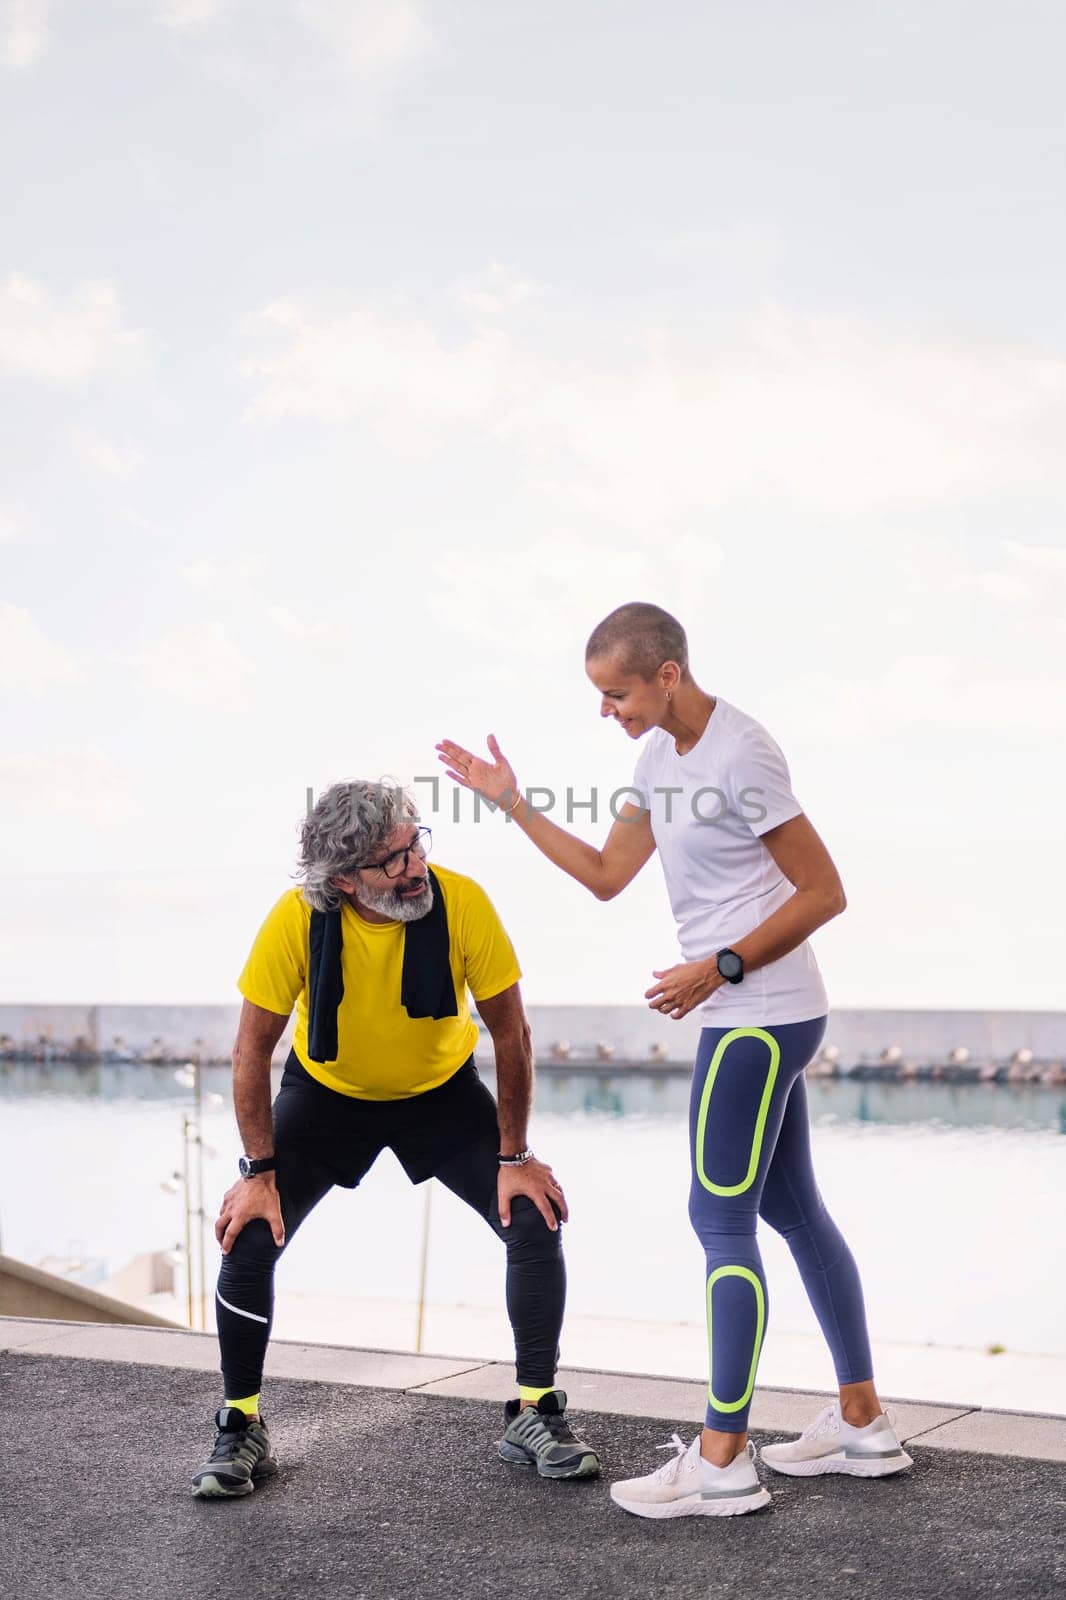 senior sports man resting exhausted next to his personal trainer after a hard workout, concept of active and healthy lifestyle in the middle age, copy space for text